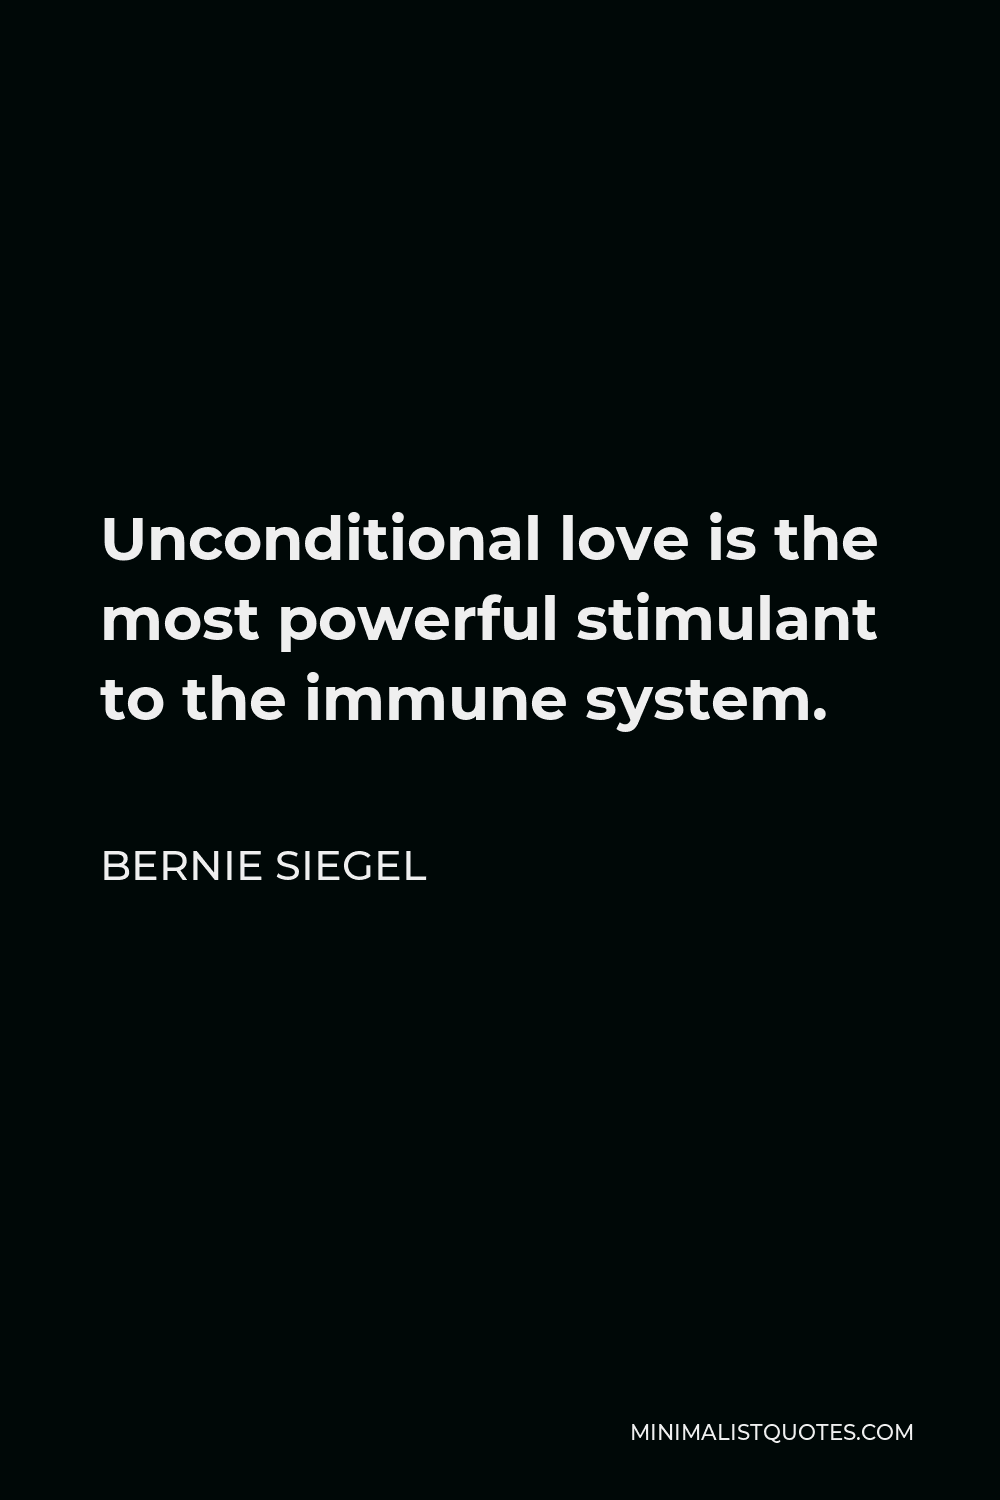 Bernie Siegel Quote - Unconditional love is the most powerful stimulant to the immune system.